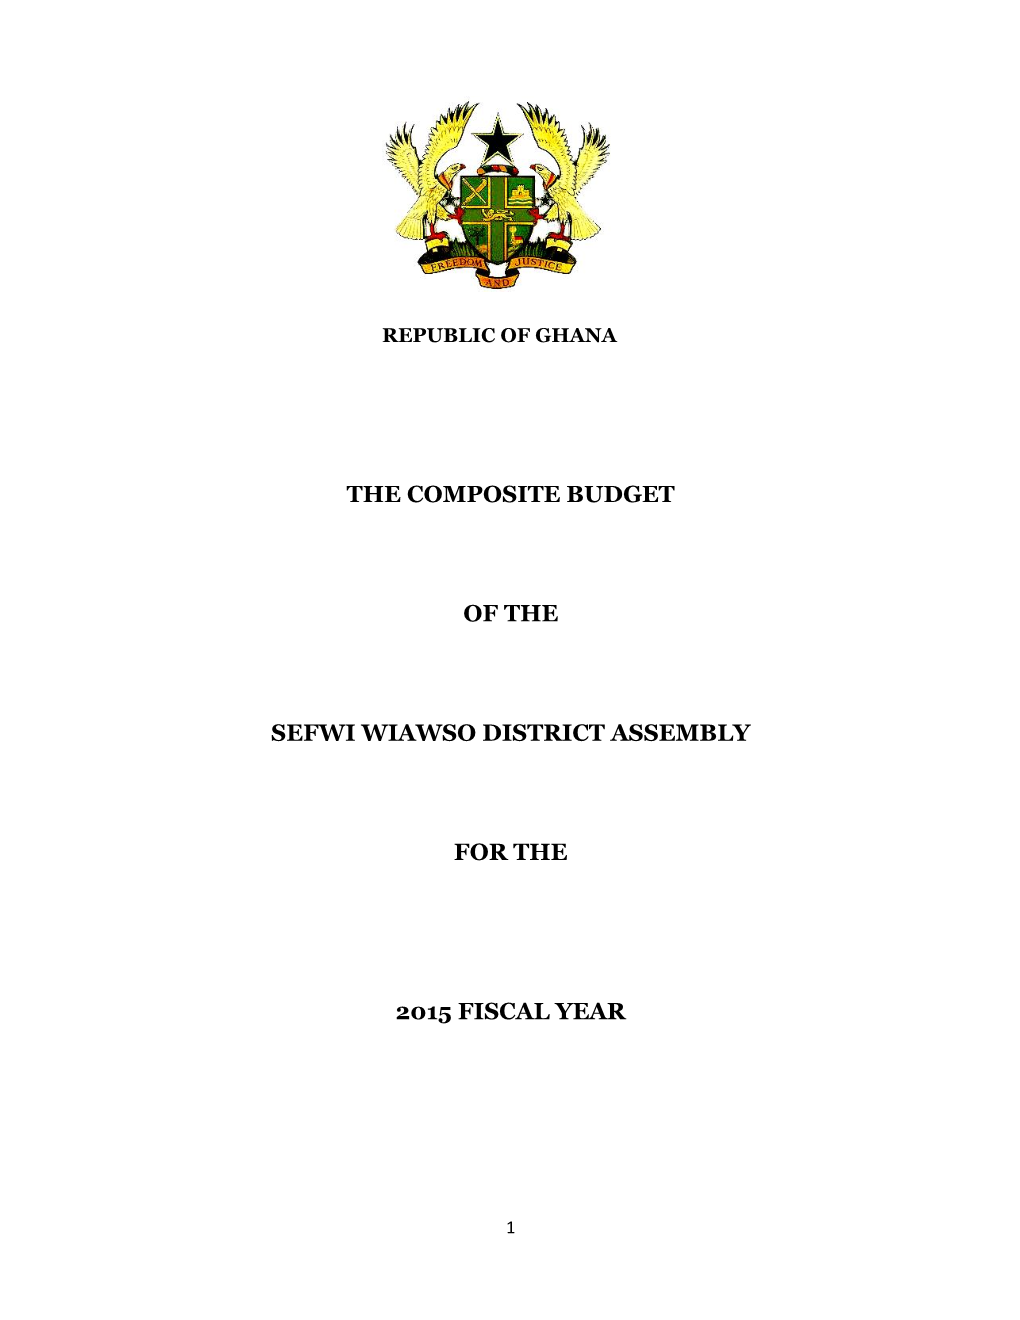 The Composite Budget of the Sefwi Wiawso District